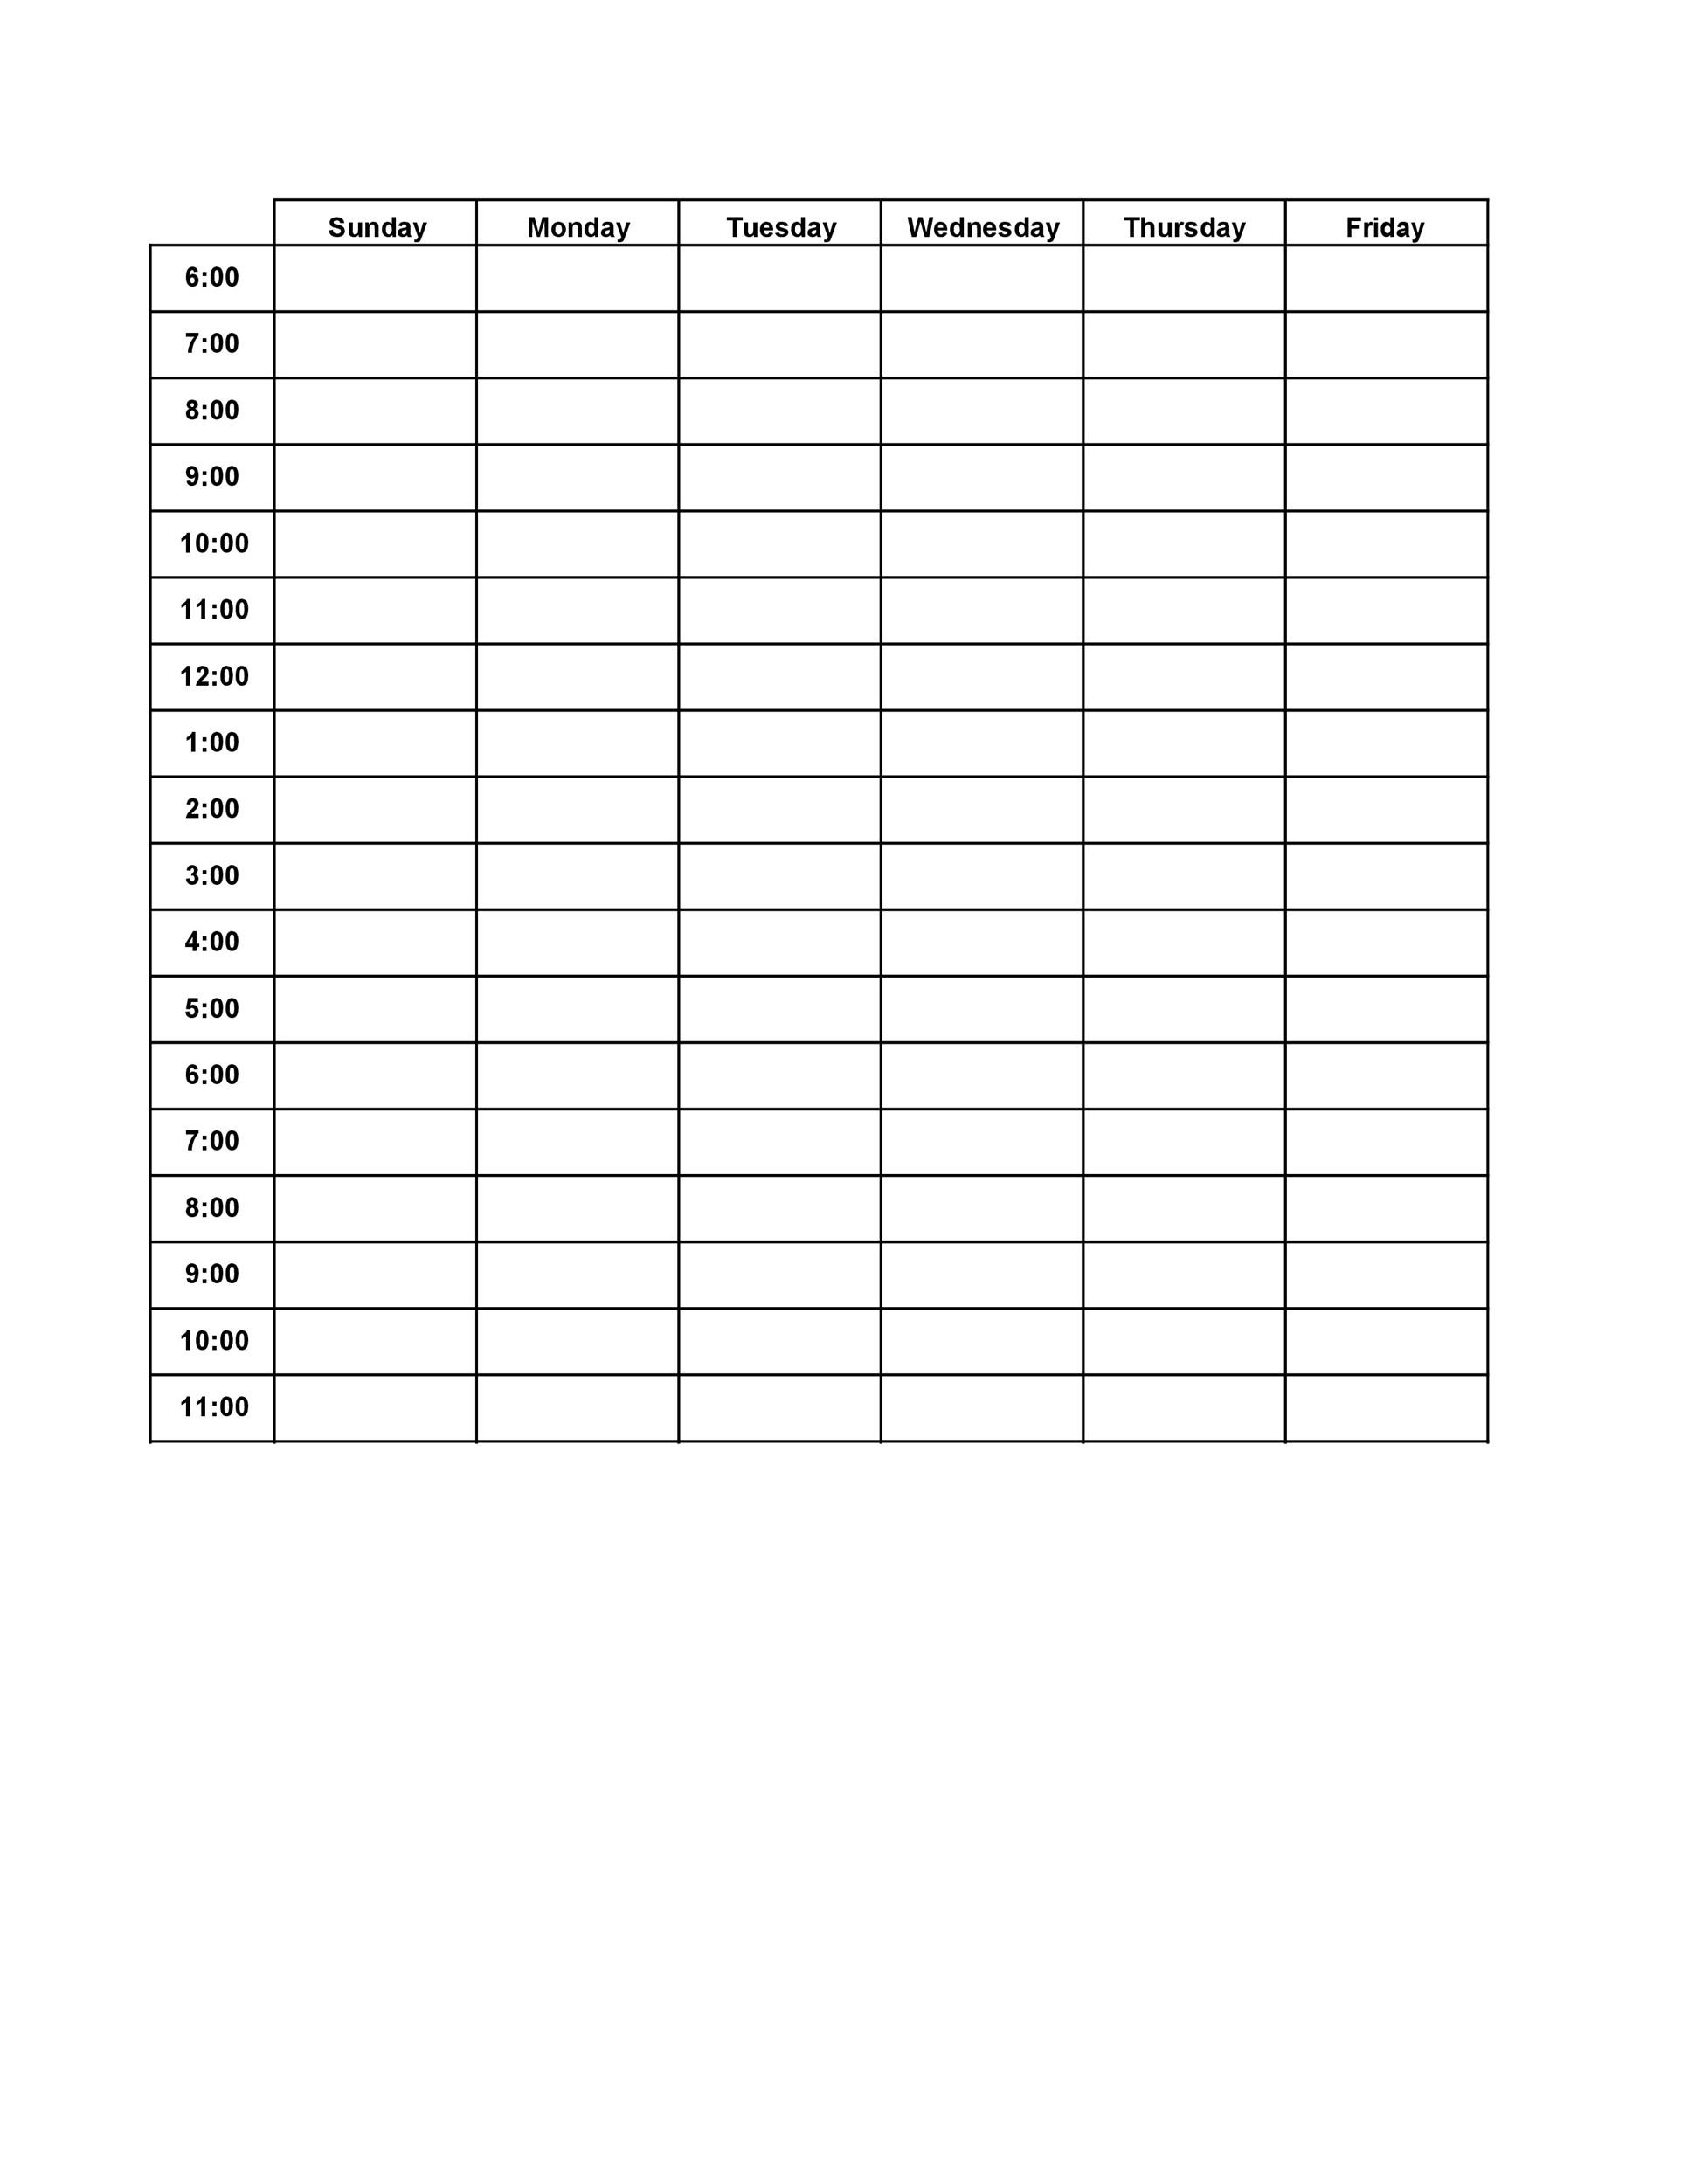 Free hourly schedule template 10